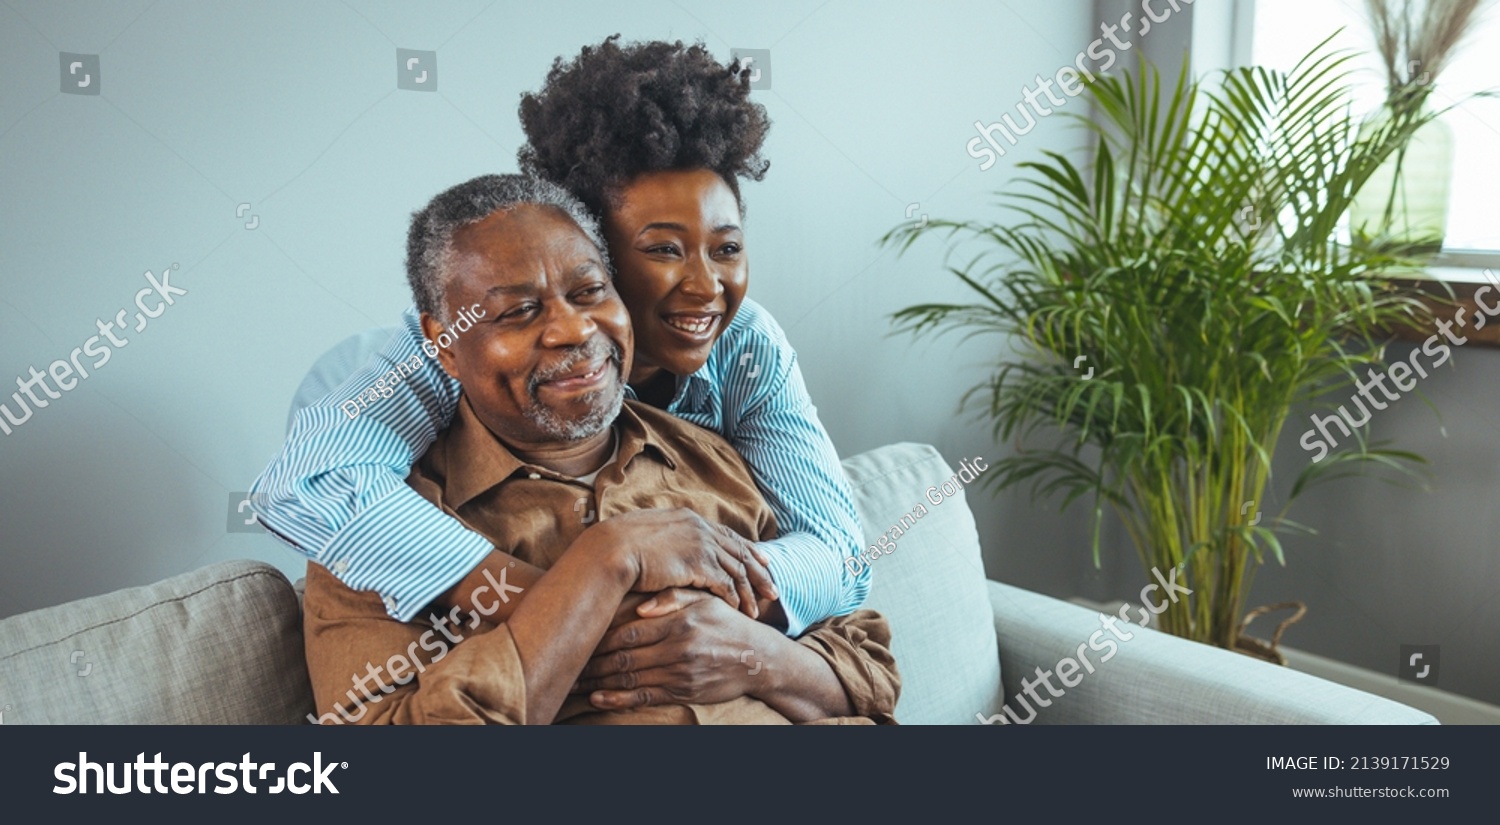 Adult daughter visits senior father in assisted living home. Portrait of a daughter holding her elderly father, sitting on a bed by a window in her father's room.  #2139171529